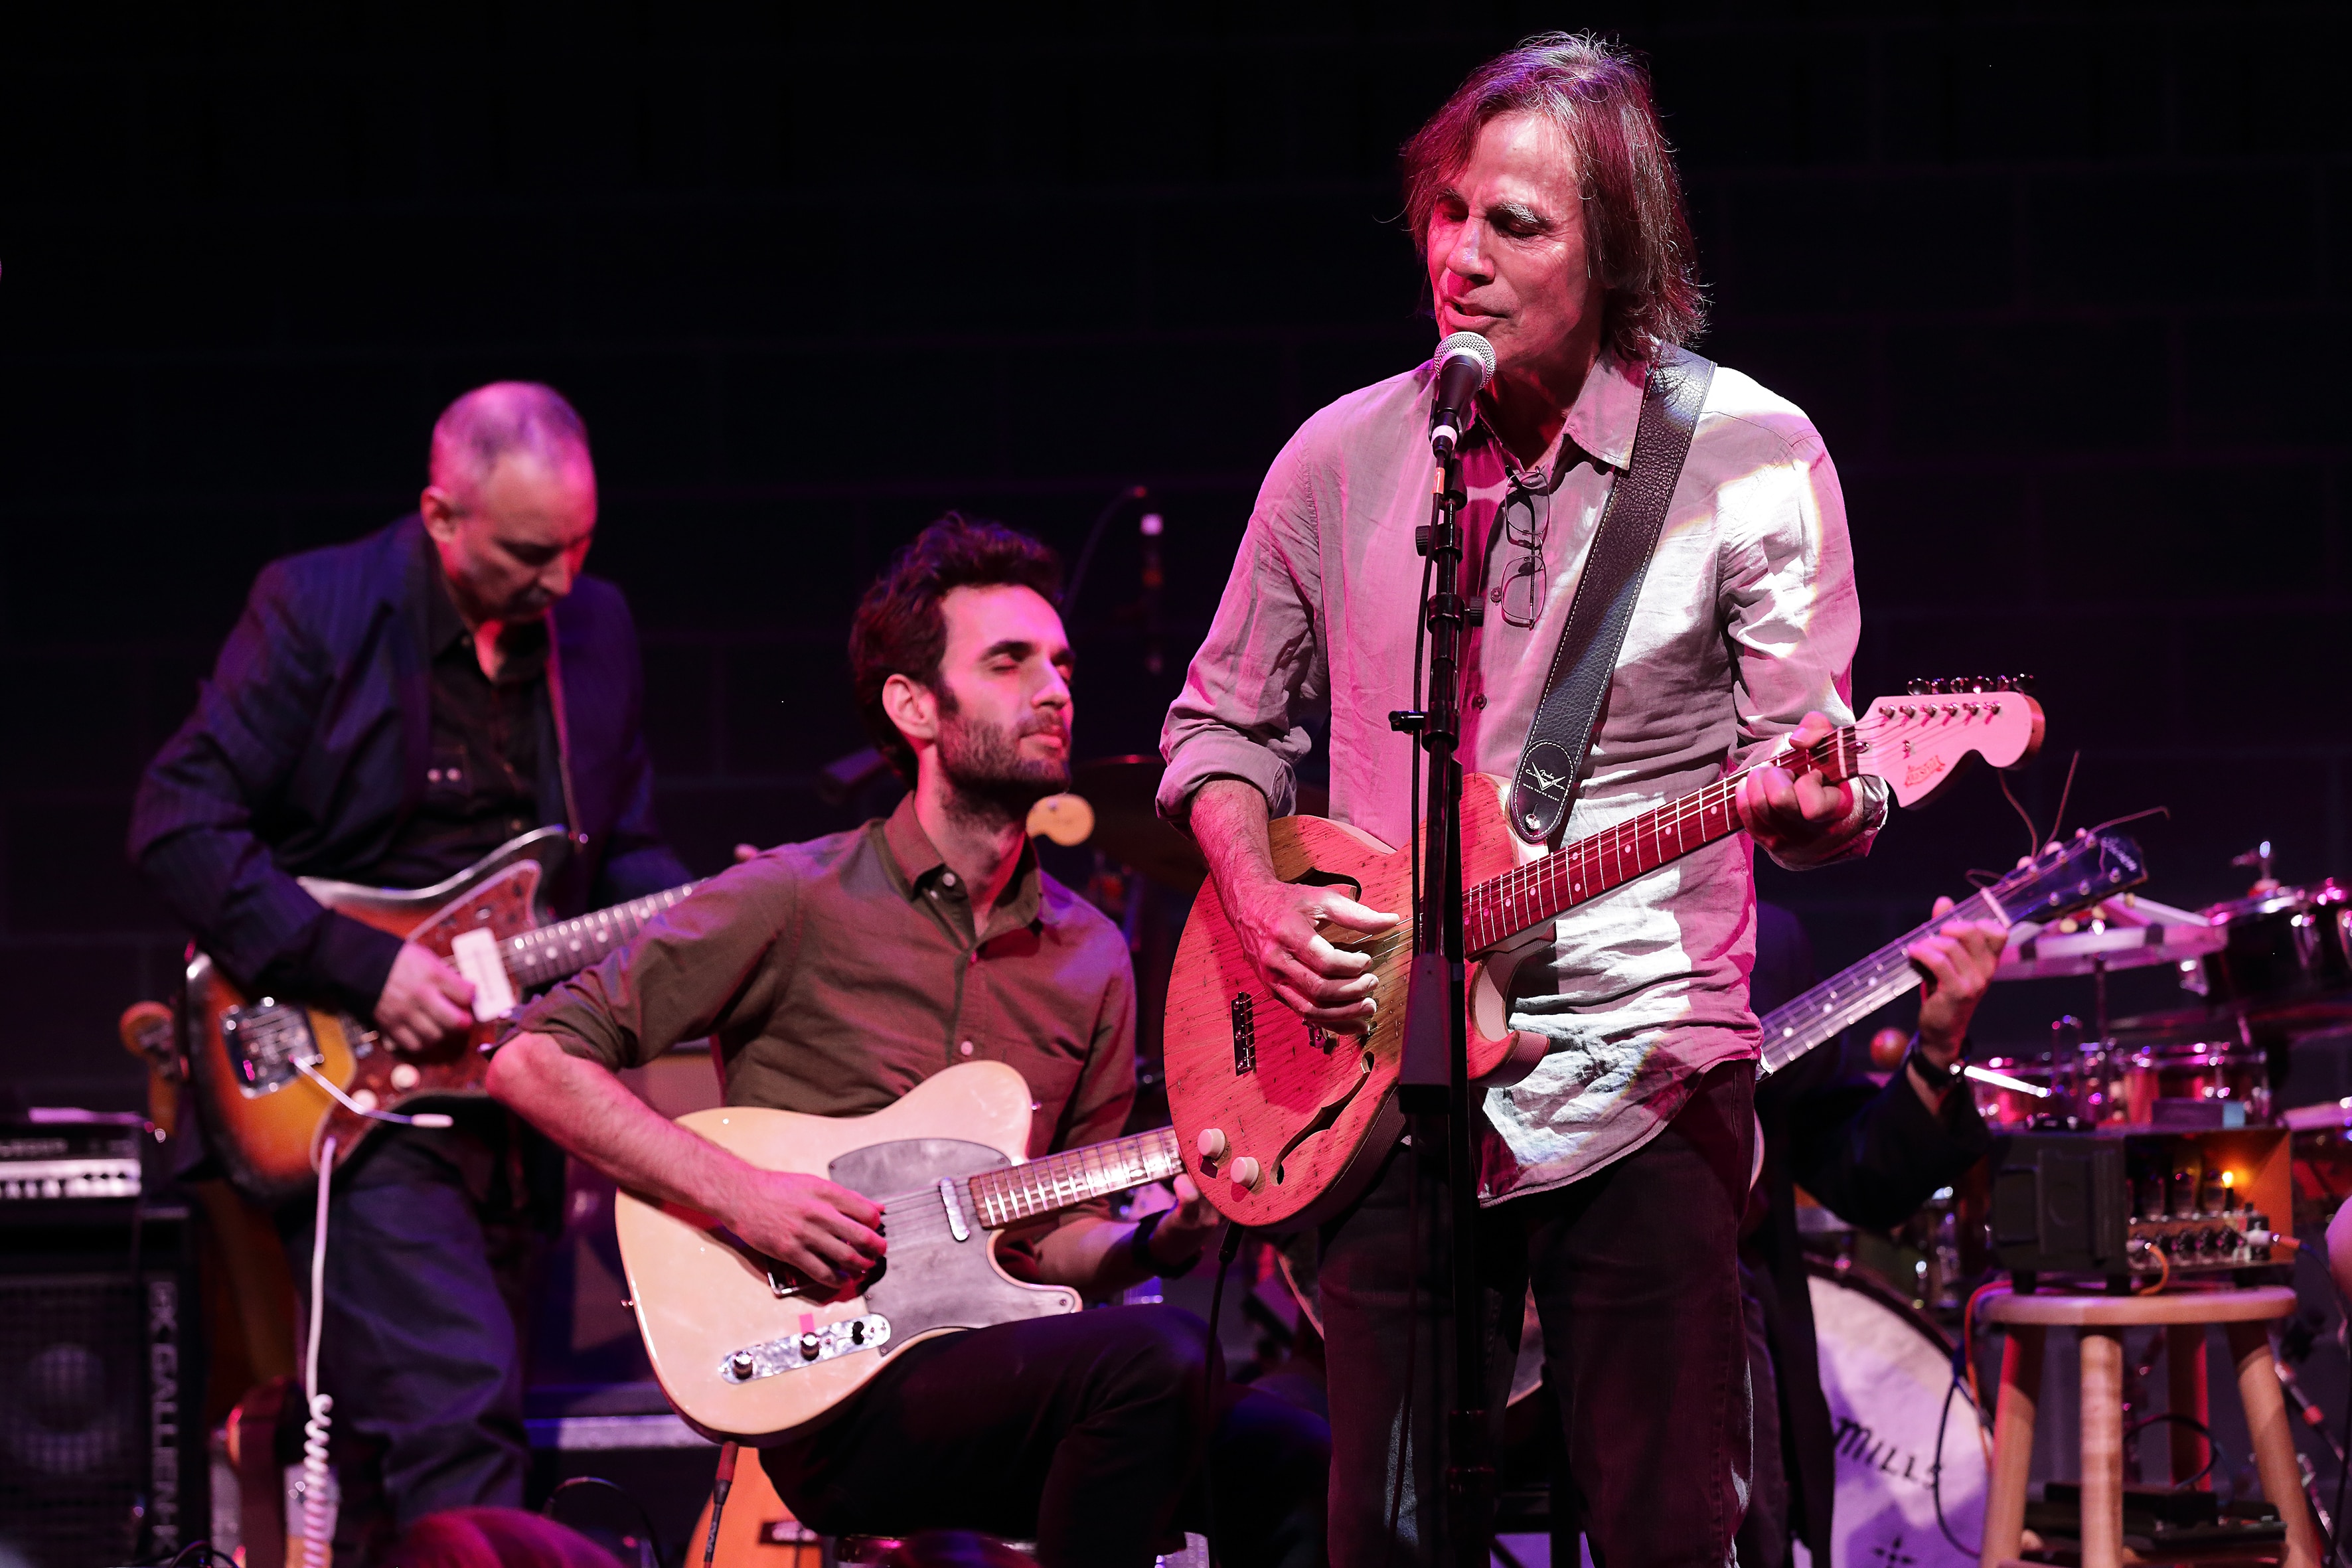 Jackson Browne, Karen O, Janis Ian And Blake Mills shine at the sold-out D’Addario benefit concert In Brooklyn